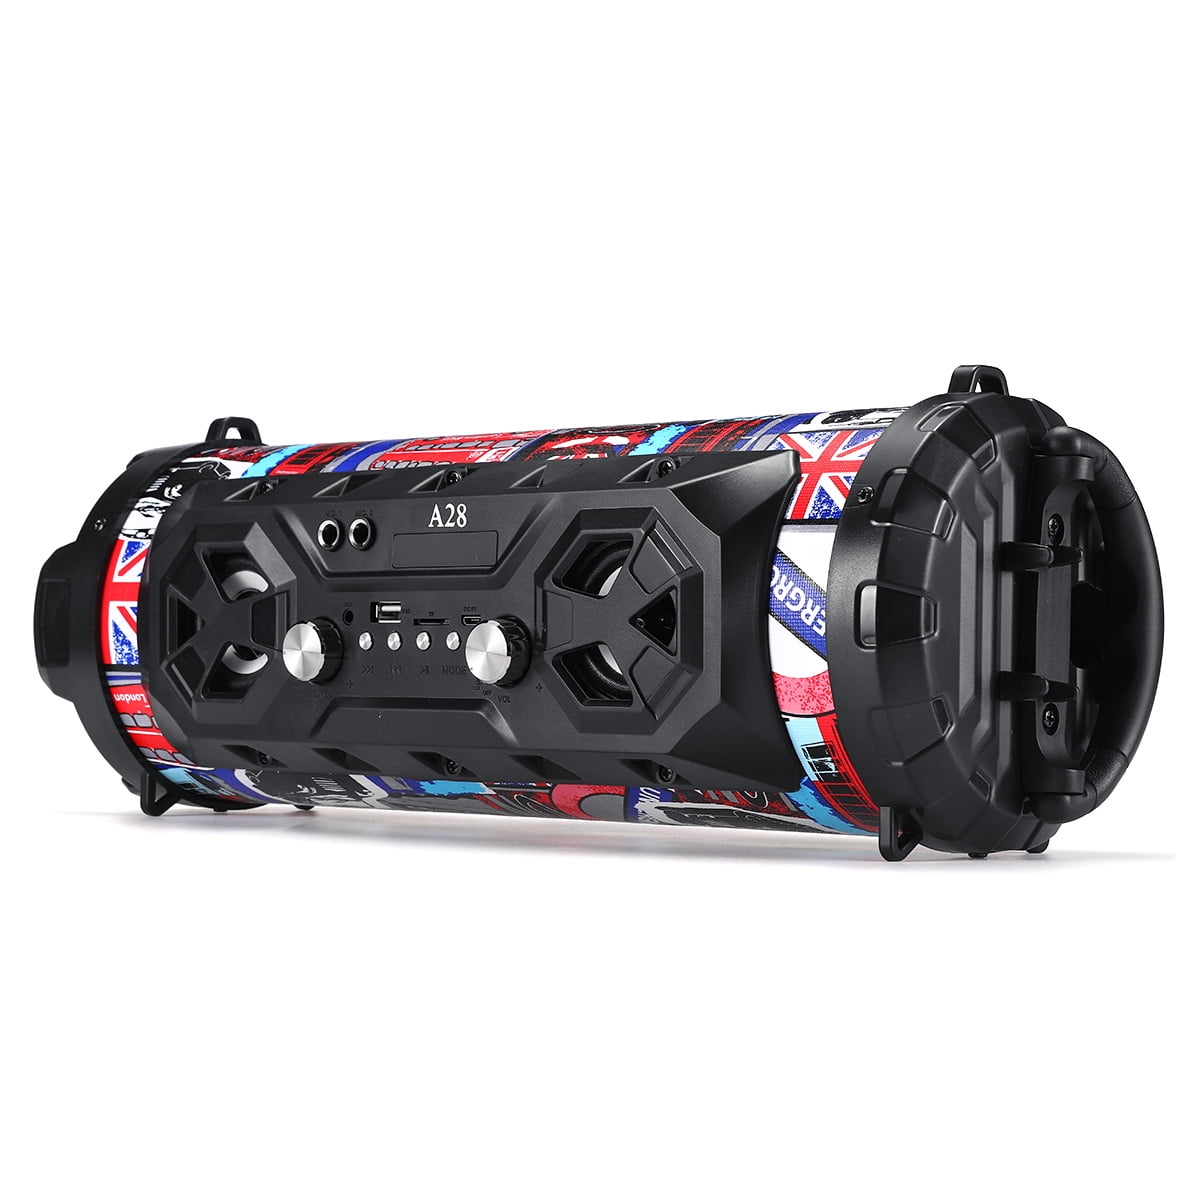 Outdoor Portable bluetooth Amplified Speaker With LED Lights Colorful LED Wireless Stereo Super Bass Subwoofer Loudspeaker AUX USB FM TF with Phone Holder - Black/Blue/Graffiti/Camouflage/Red